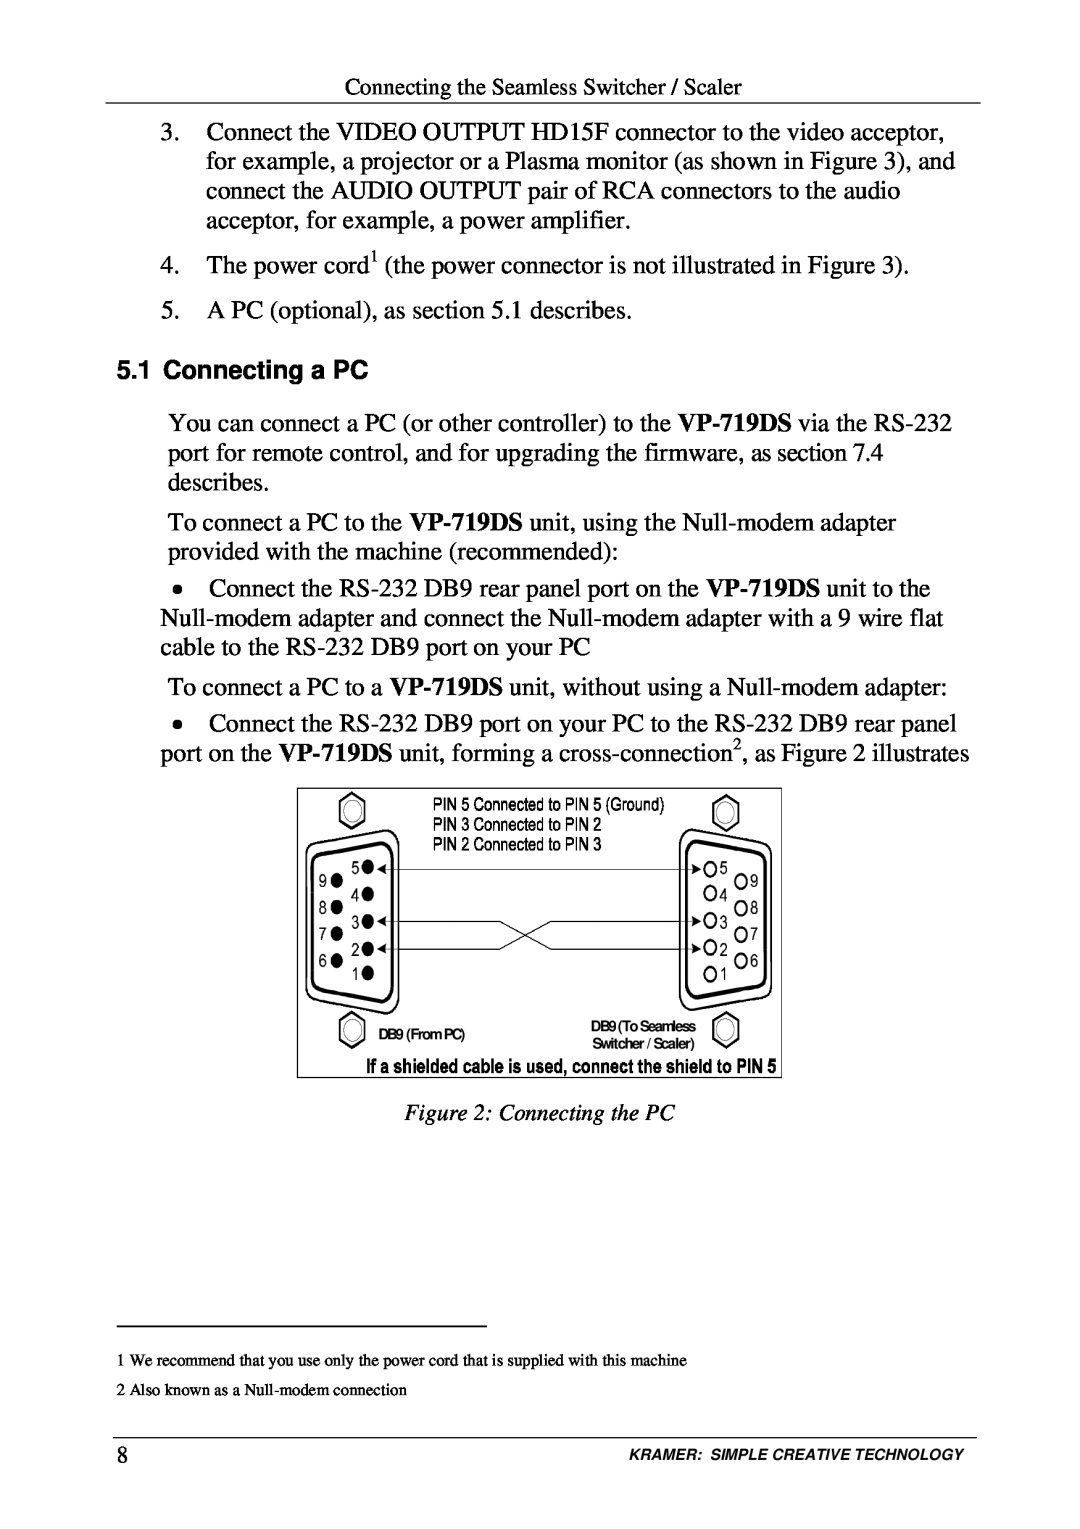 Kramer Electronics VP-719DS user manual 5.1Connecting a PC 